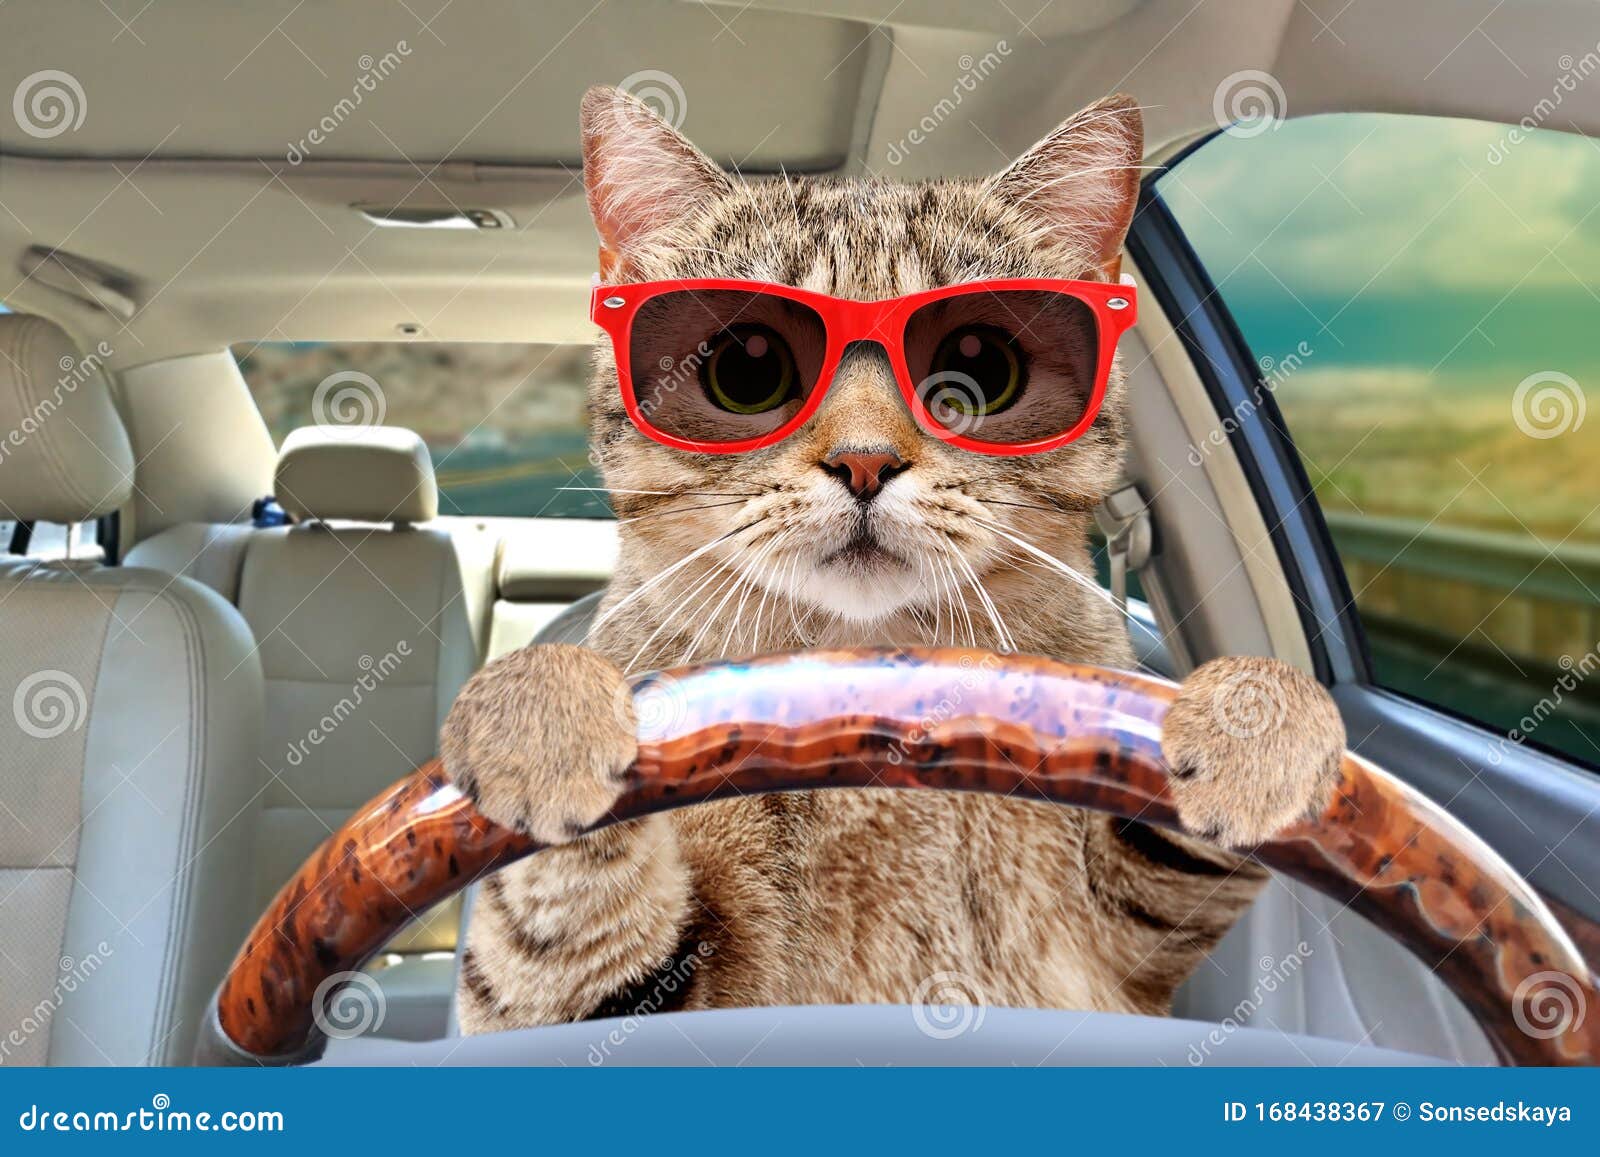 cat with sunglasses driving a car